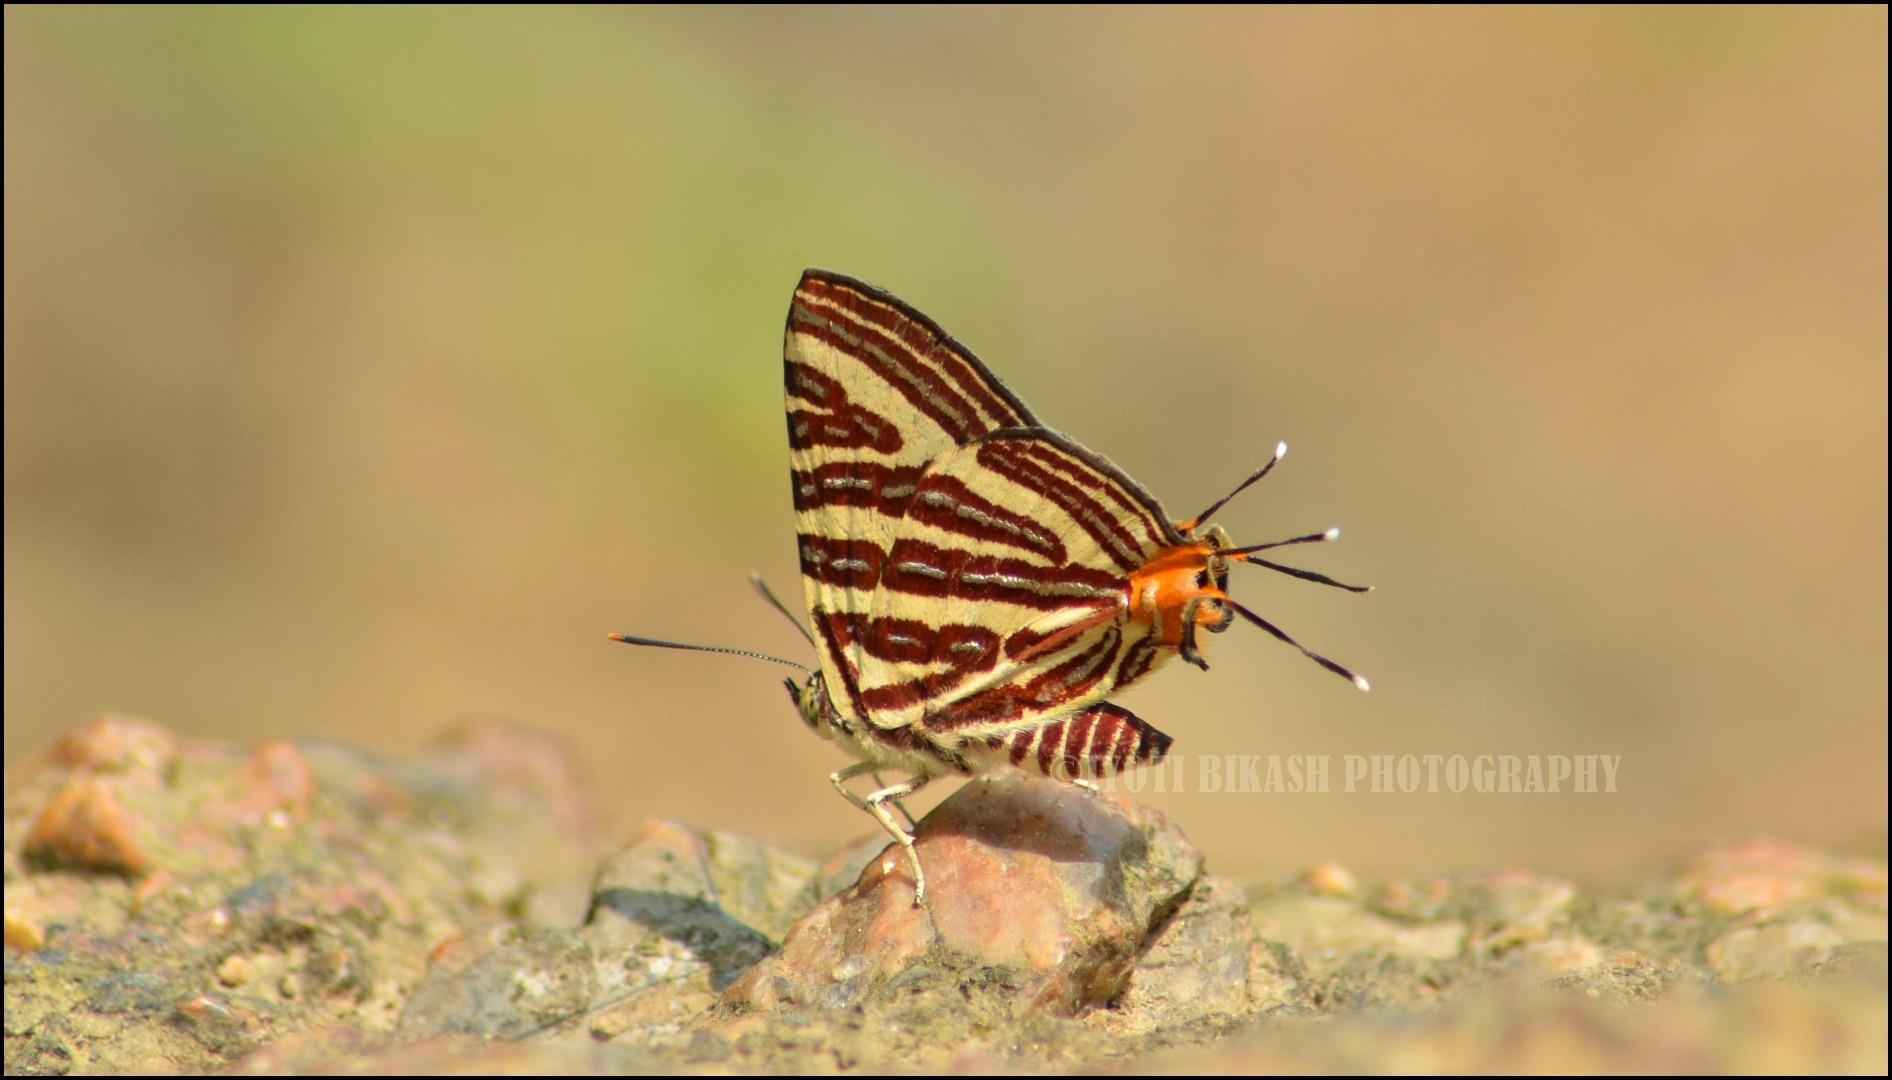 Long-banded silverline